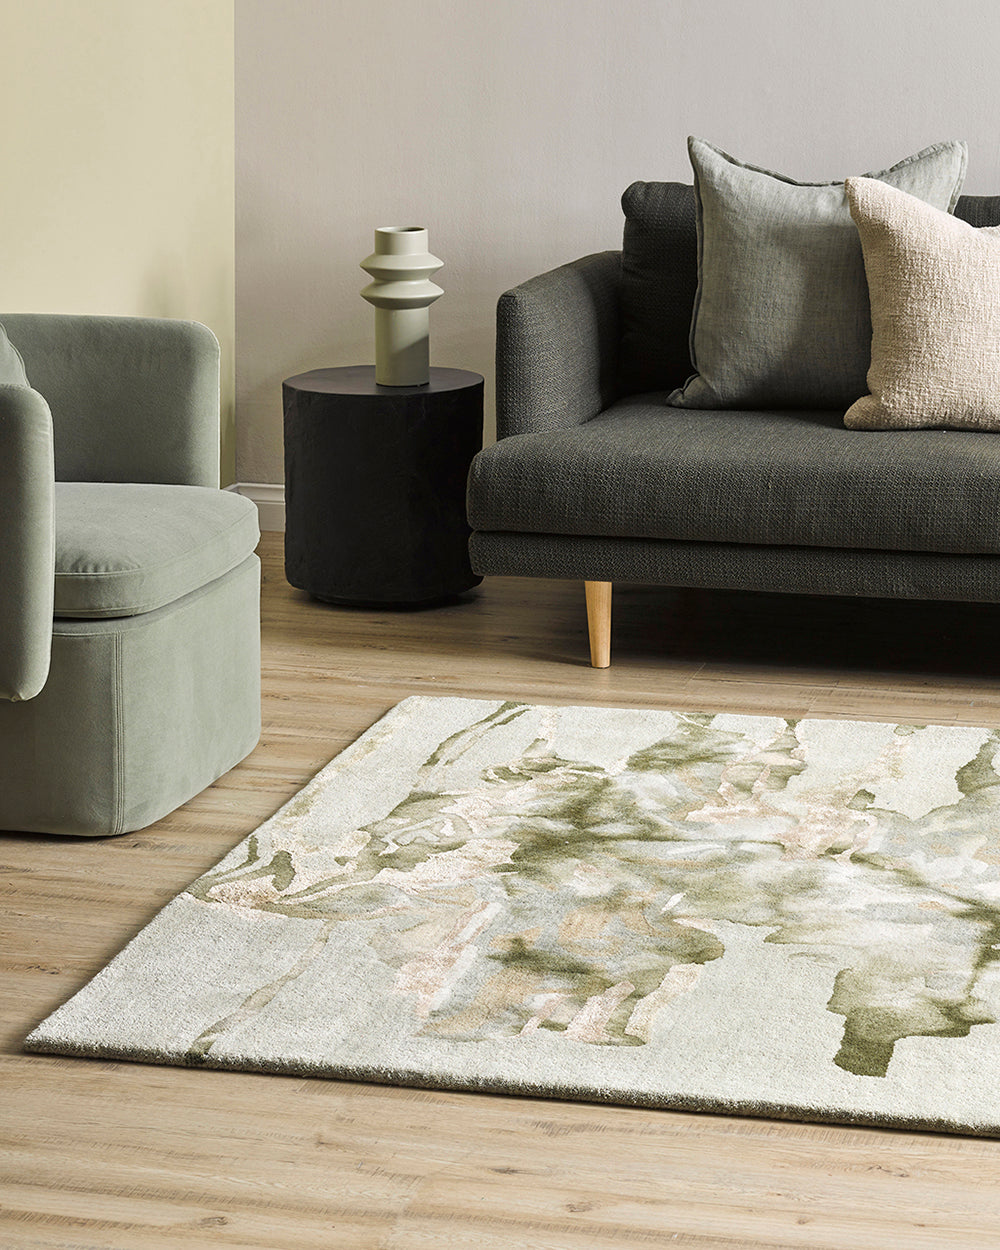 Fayette Rug from Baya Furtex Stockist Make Your House A Home, Furniture Store Bendigo. Free Australia Wide Delivery. Mulberi Rugs.